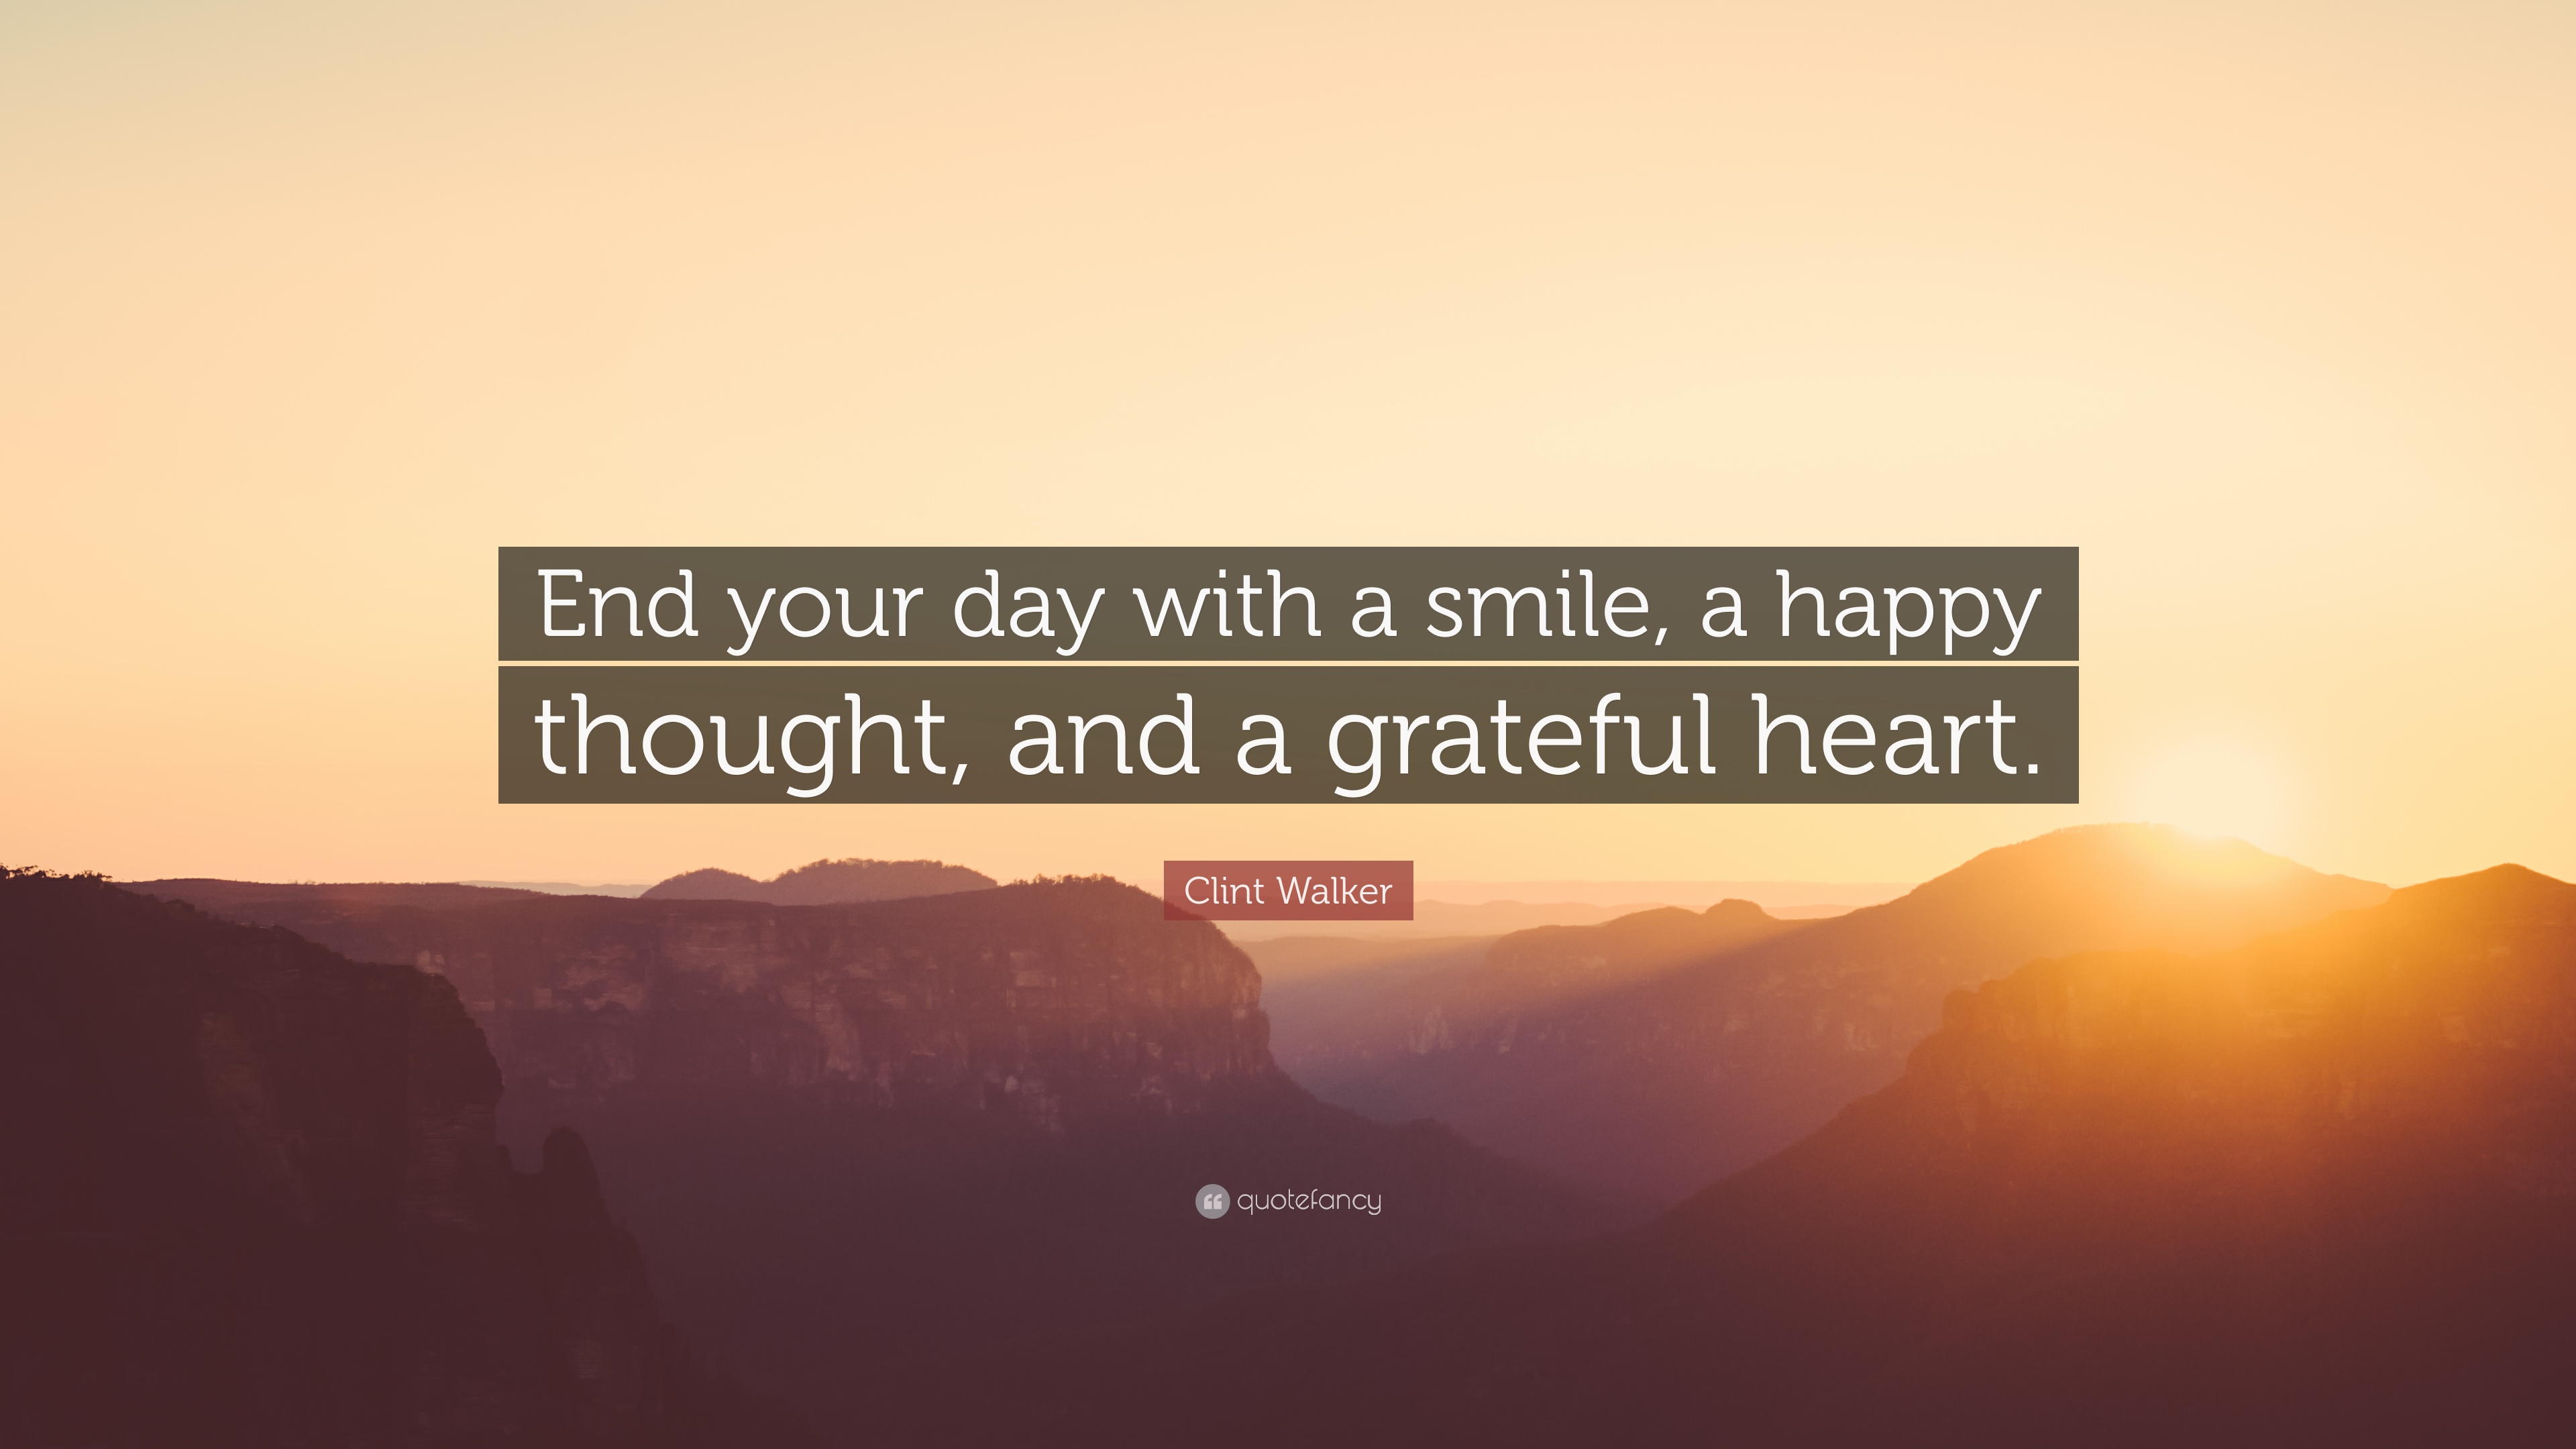 Clint Walker Quote: “End your day with a smile, a happy thought, and a grateful heart.”